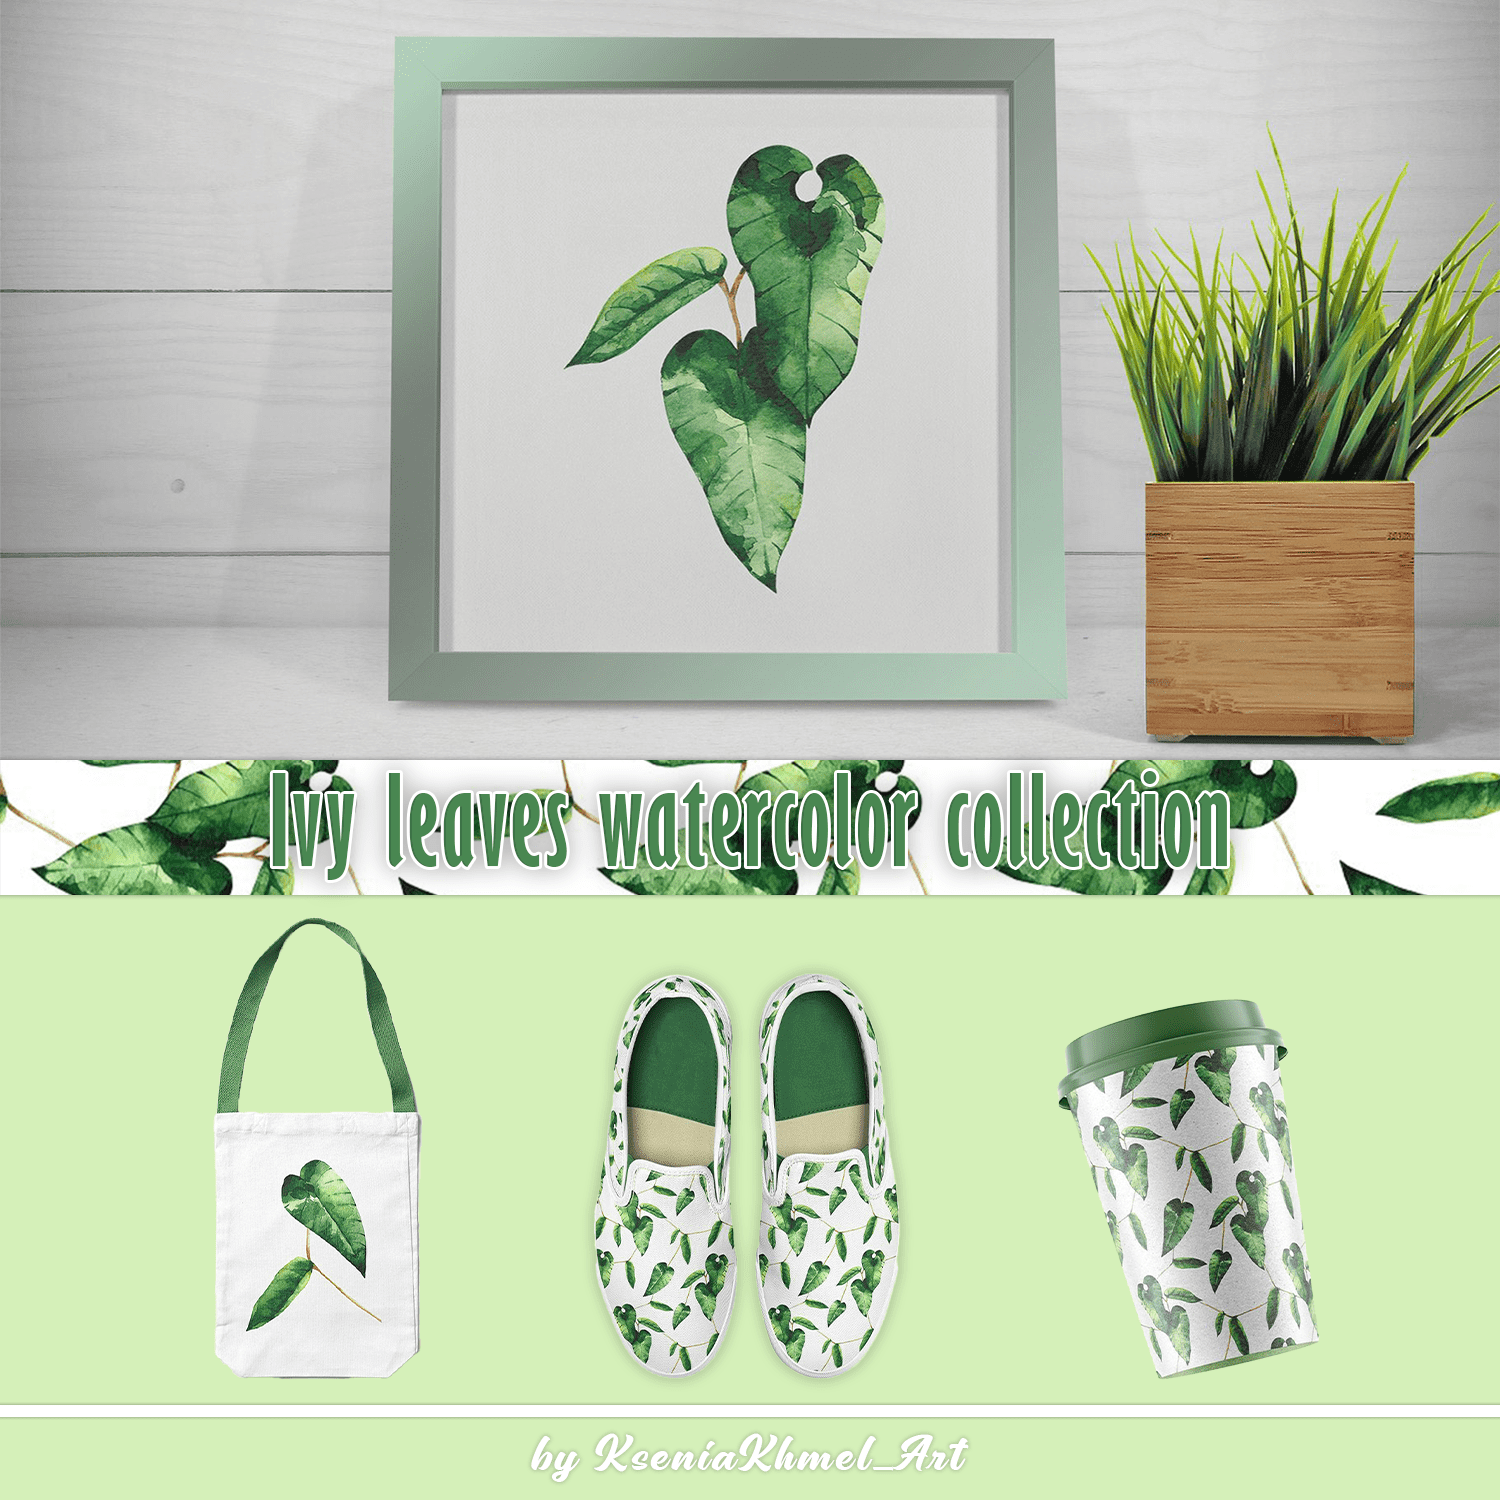 Ivy leaves watercolor collection. cover.